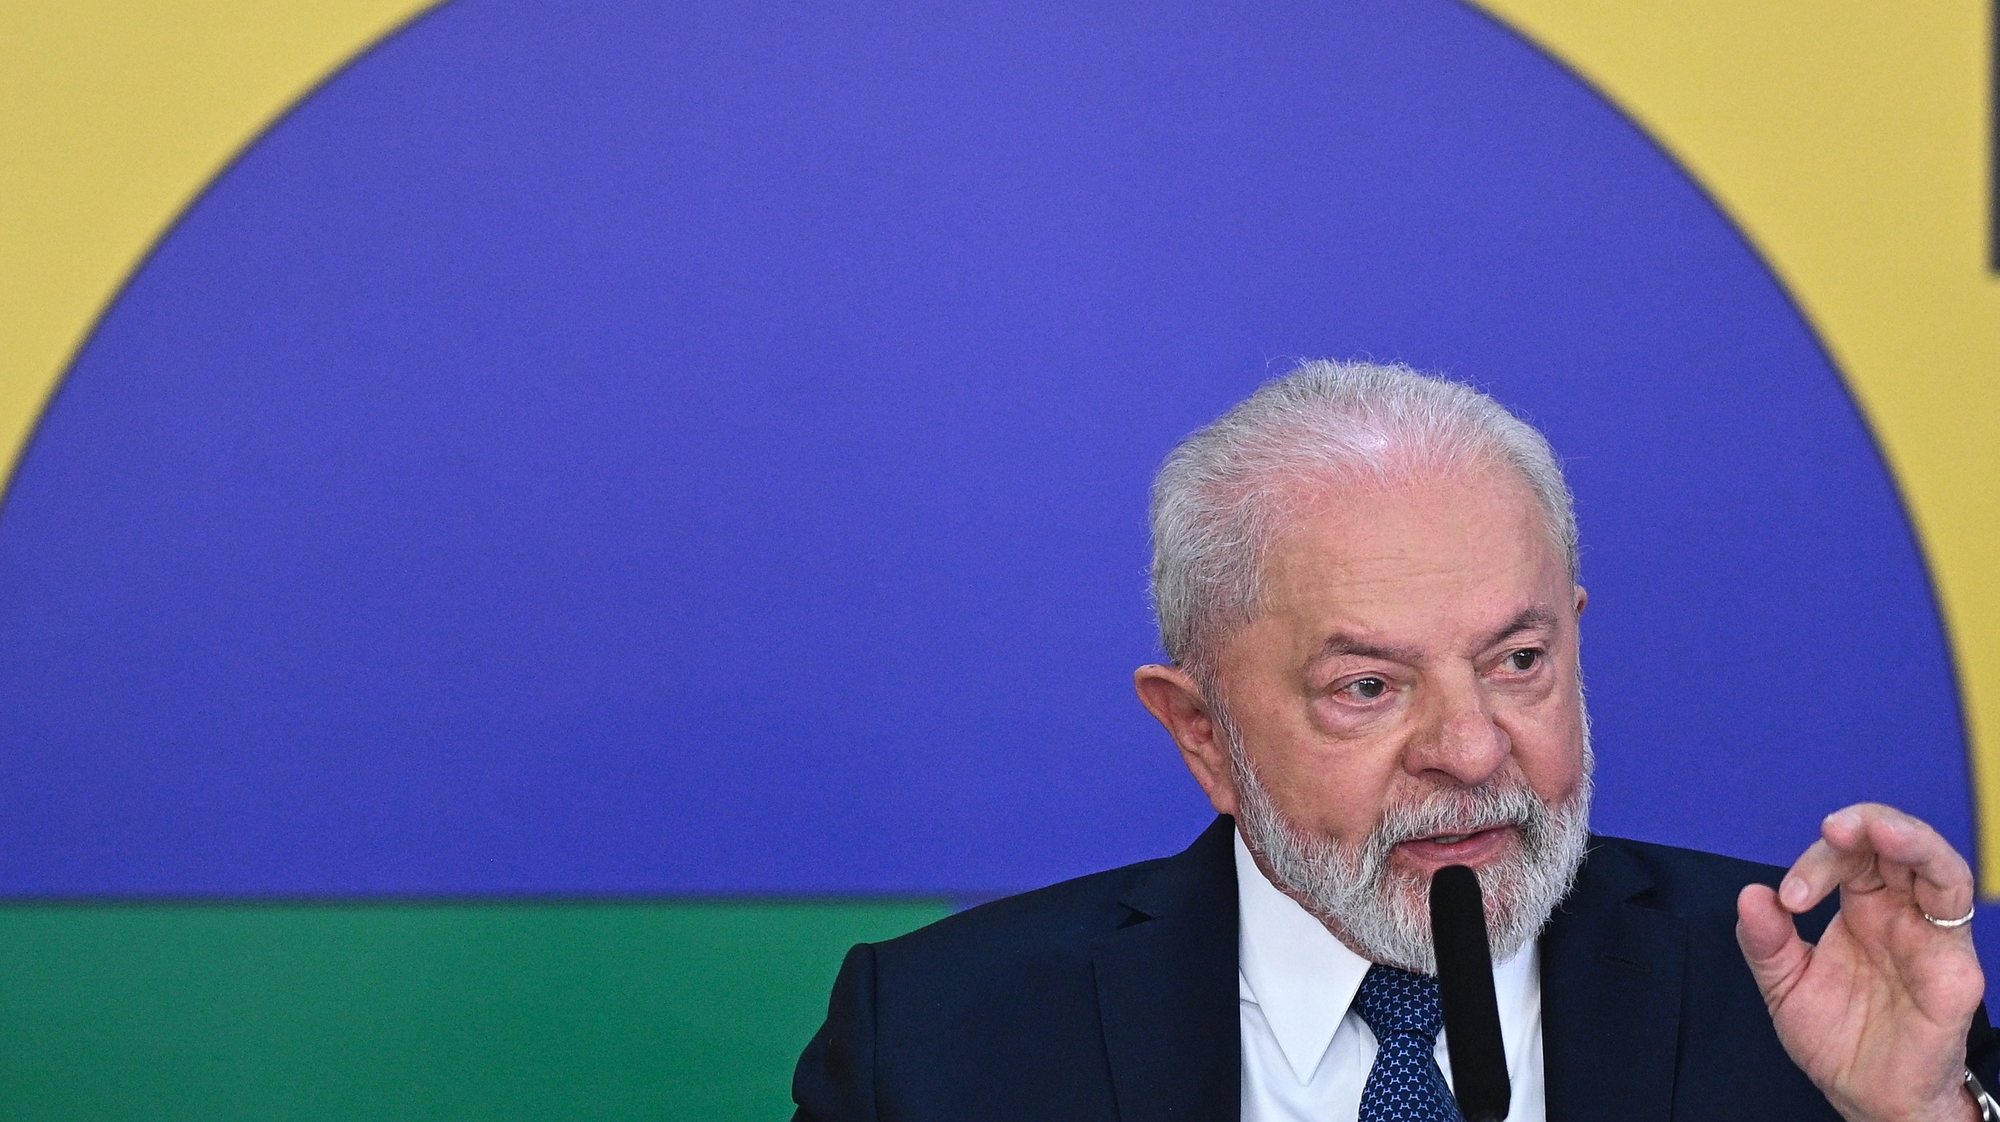 epa10781595 The President of Brazil, Luiz InÃ¡cio Lula da Silva, speaks during a press conference with foreign correspondents at the Planalto Palace, in Brasilia, Brazil, 2 August 2023. Brazilian President Luiz InÃ¡cio Lula da Silva said that he hopes &quot;democracy wins&quot; in the elections to be held in Argentina in October and that a candidate who &quot;thinks that social investment is spending&quot; will not prevail.  EPA/Andre Borges